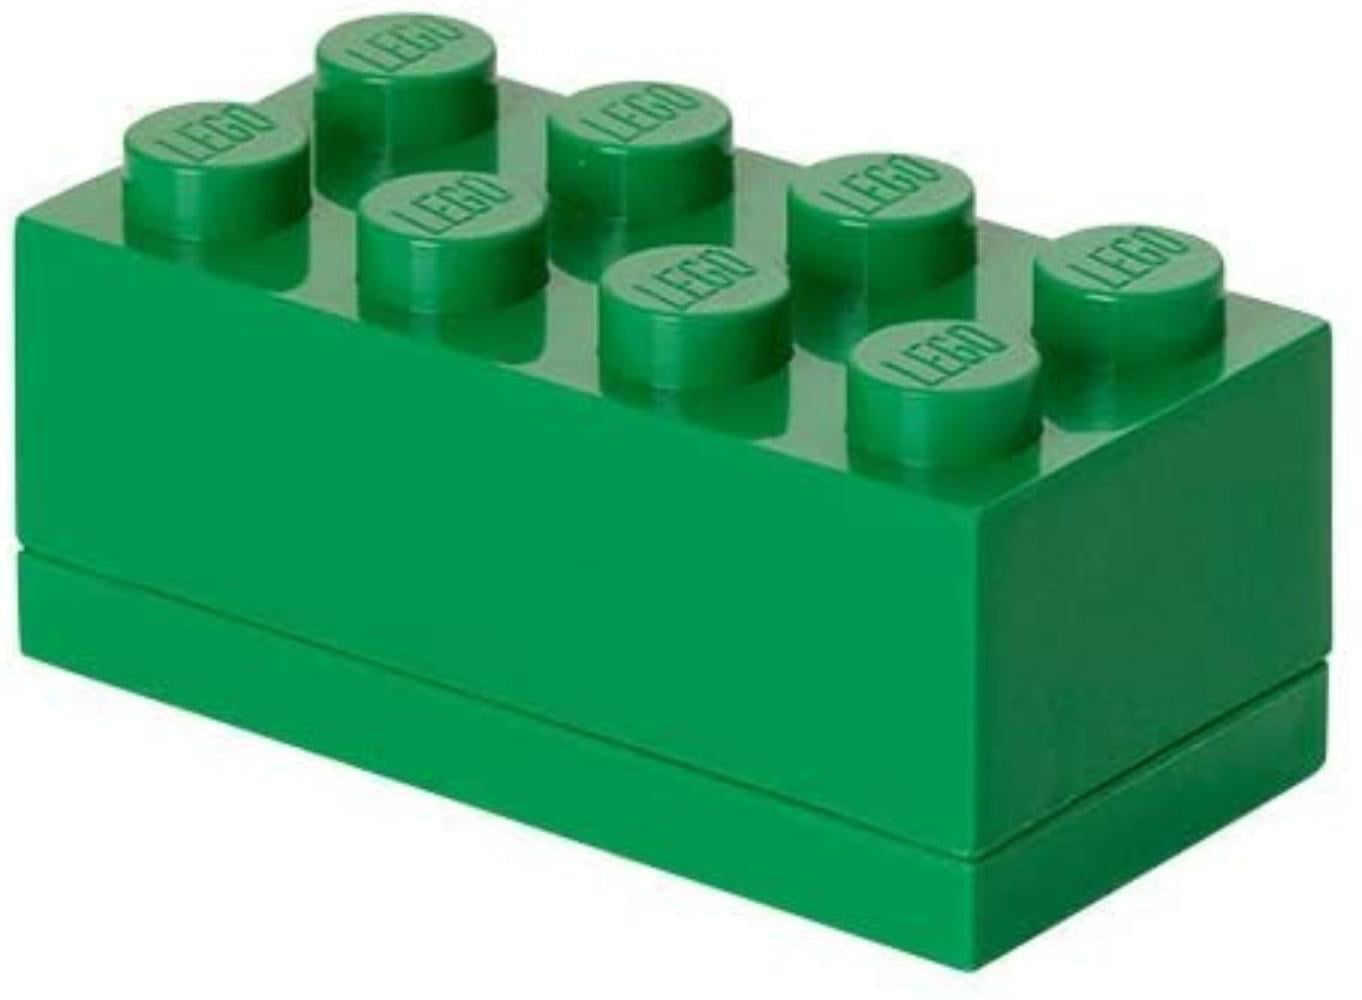 LEGO Classic Box With 8 Knobs in Light Royal Blue Room Copenhagen Toy 